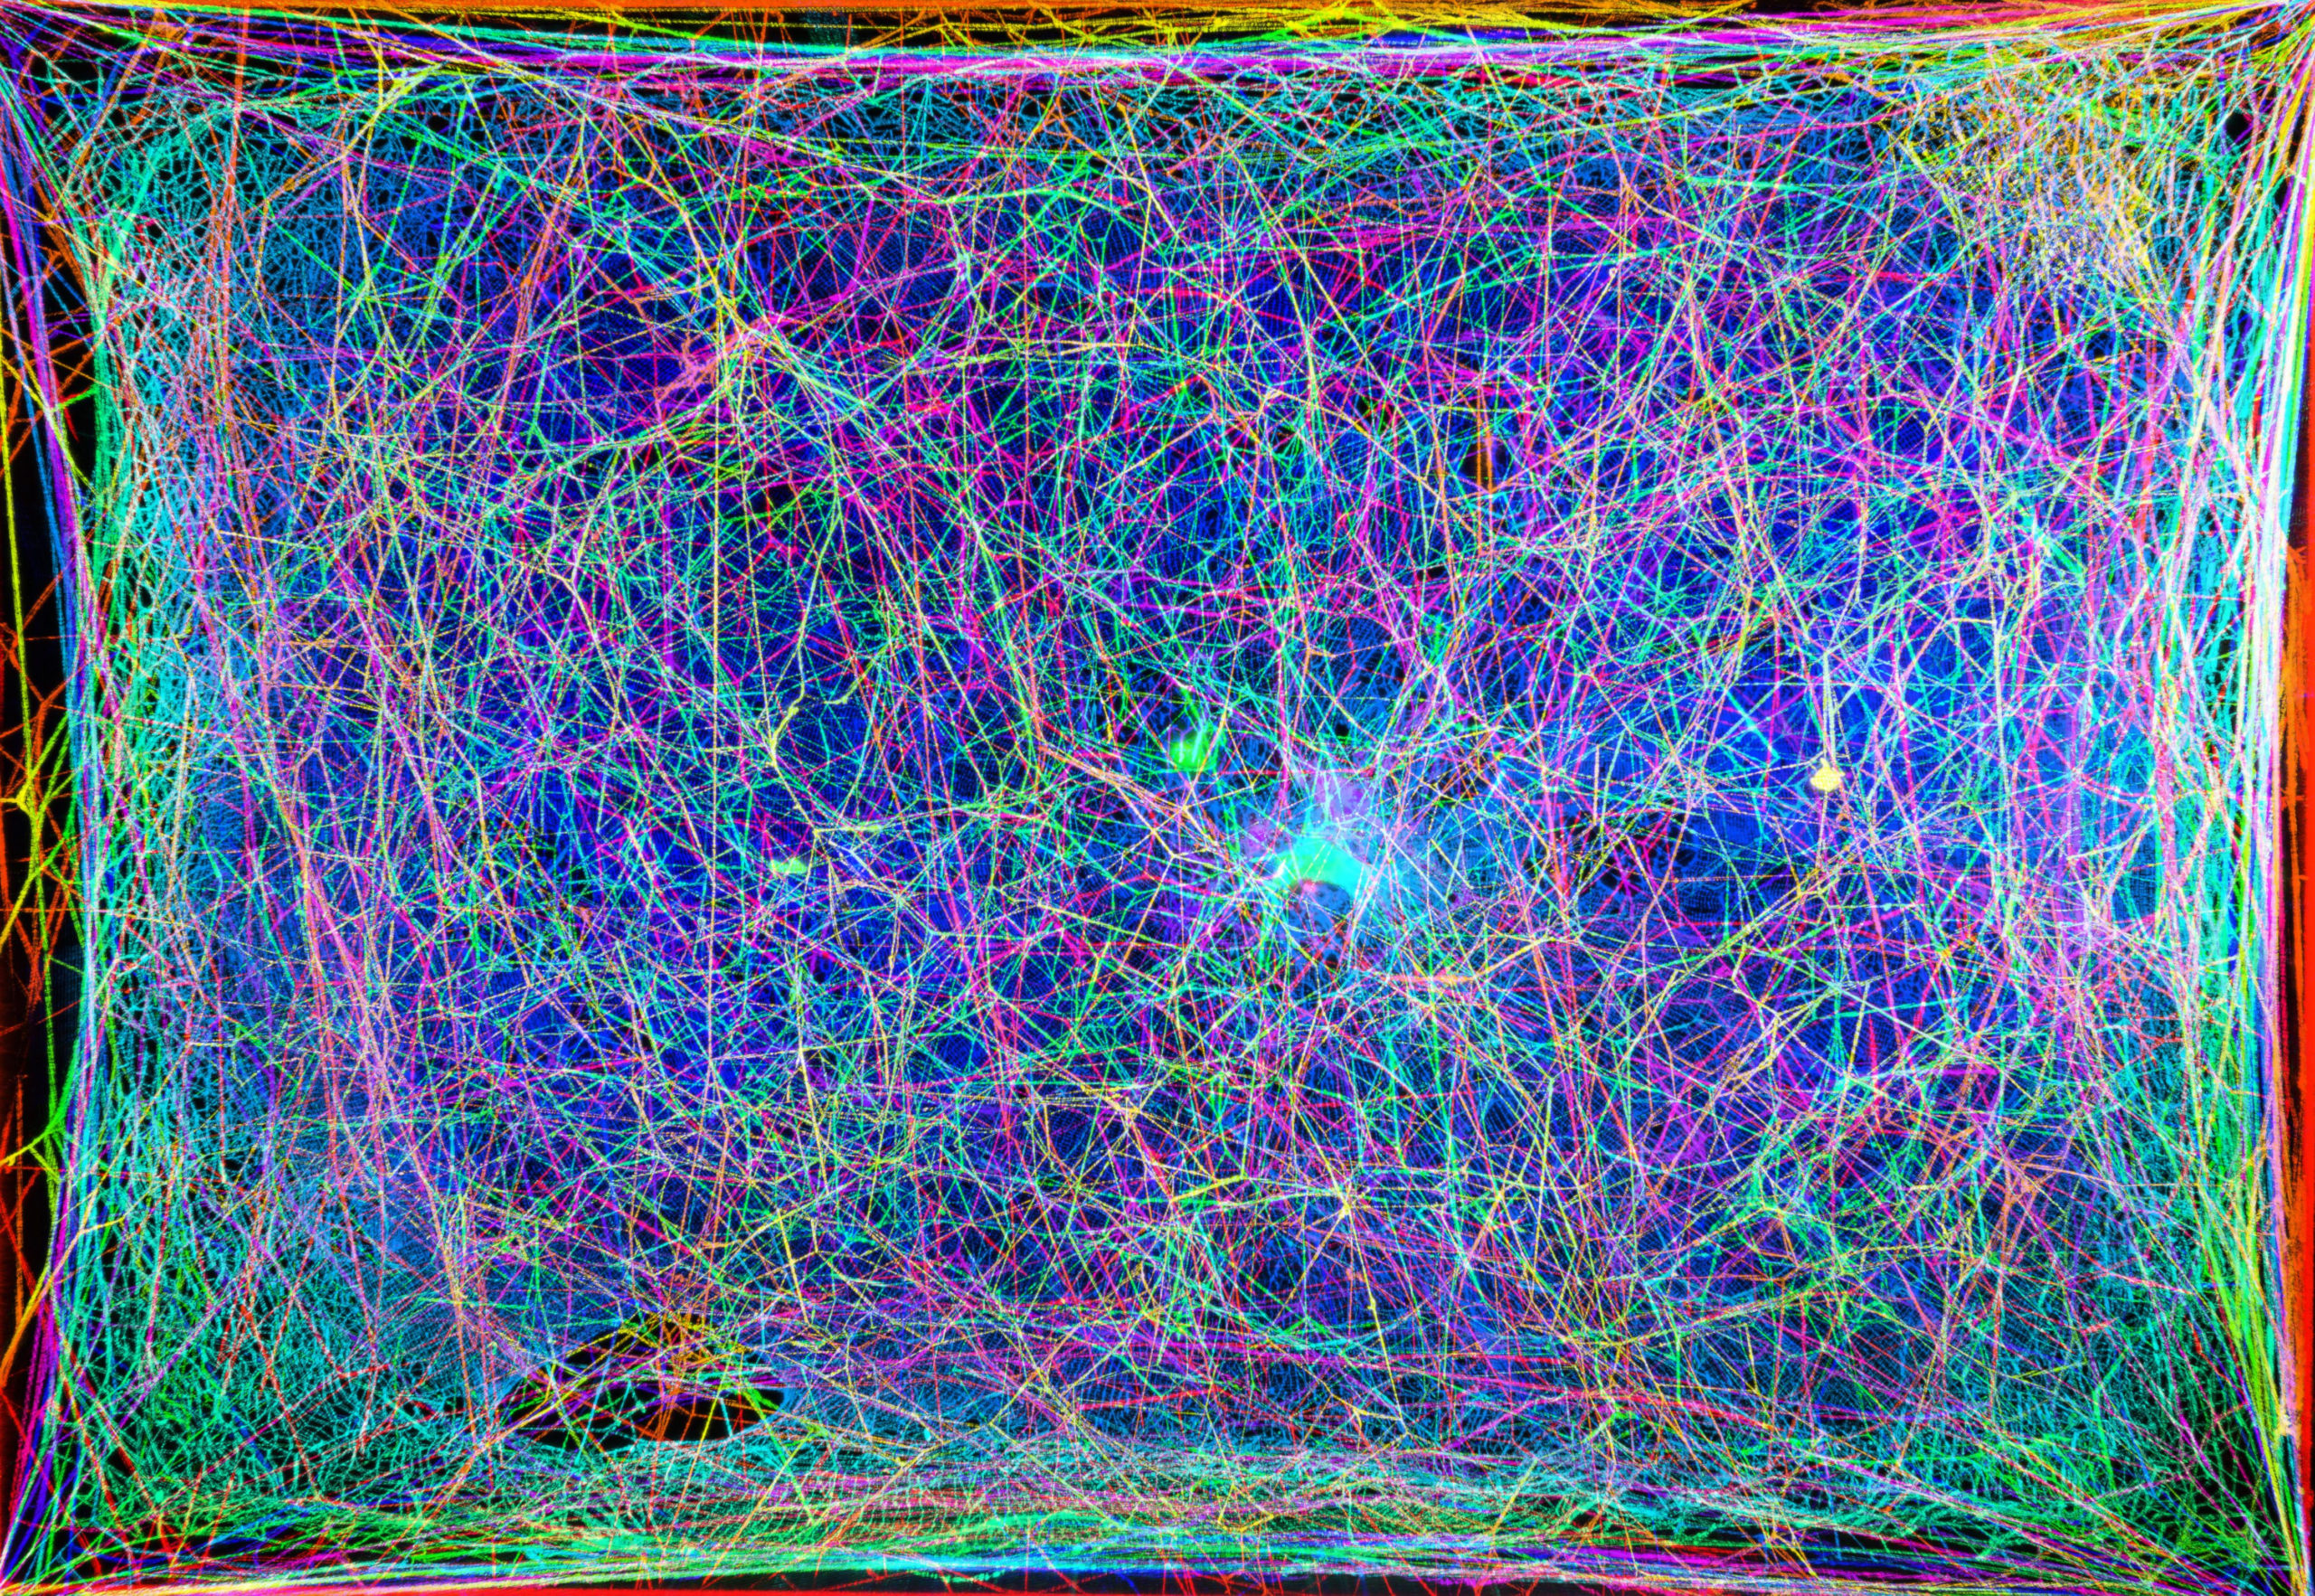 An overlaid image of different portions of the lab's spider web. (Image: Markus Buehler)